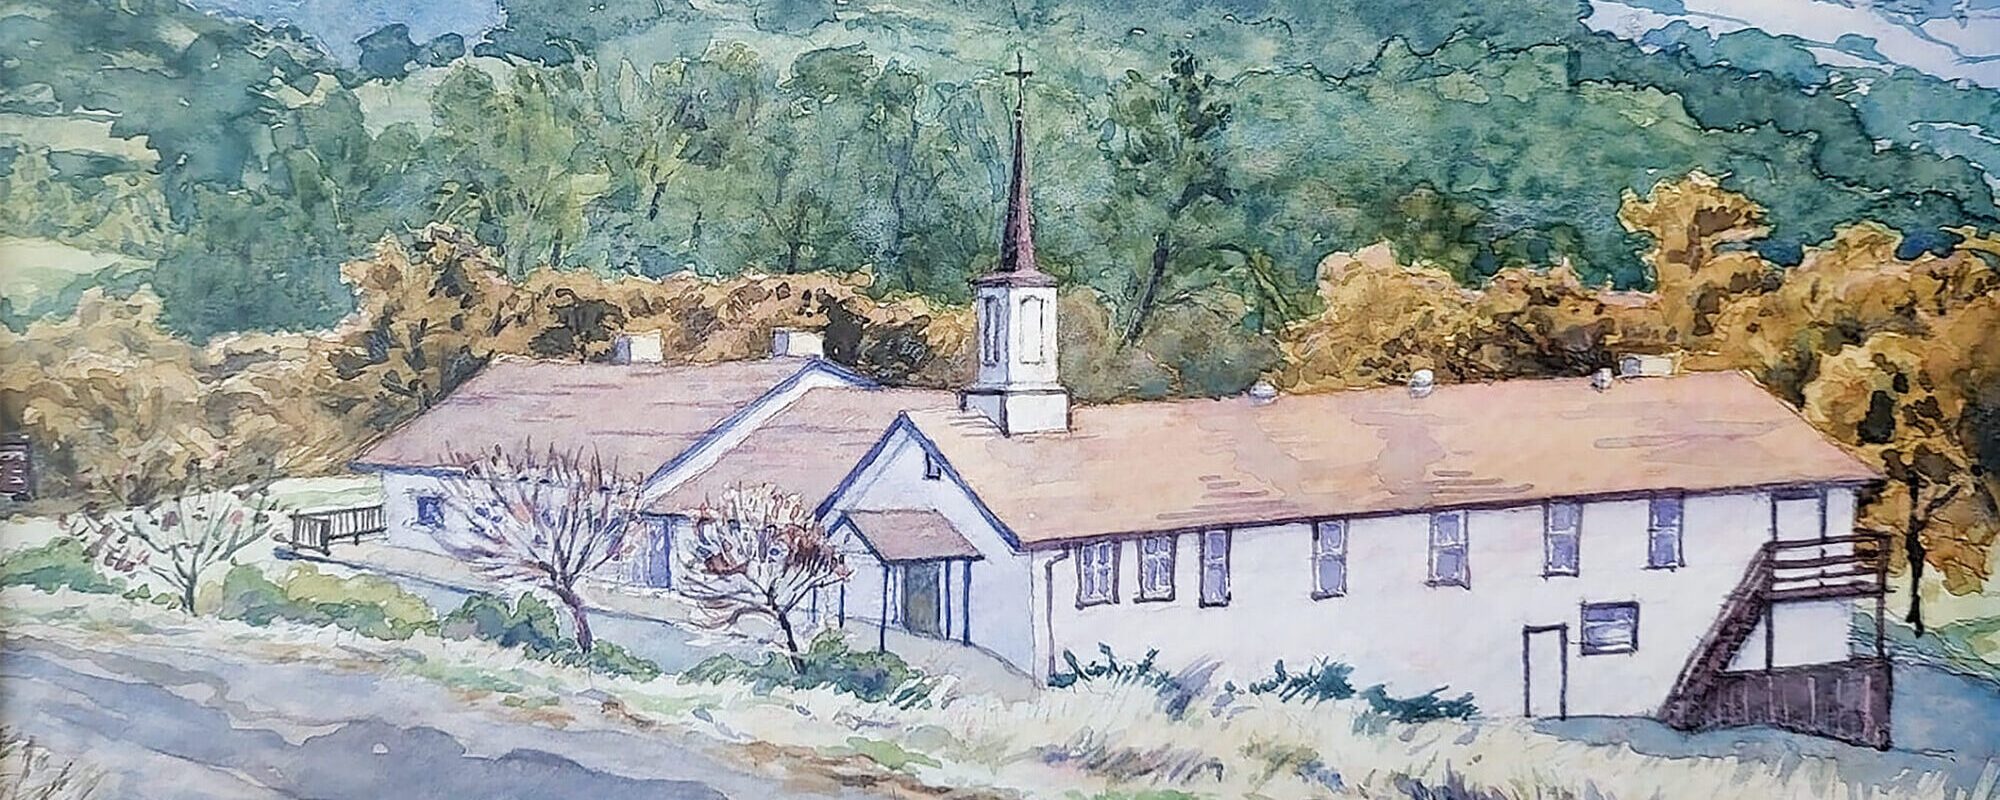 cropped-LDPBaptist_Painting_BannerImage.jpg